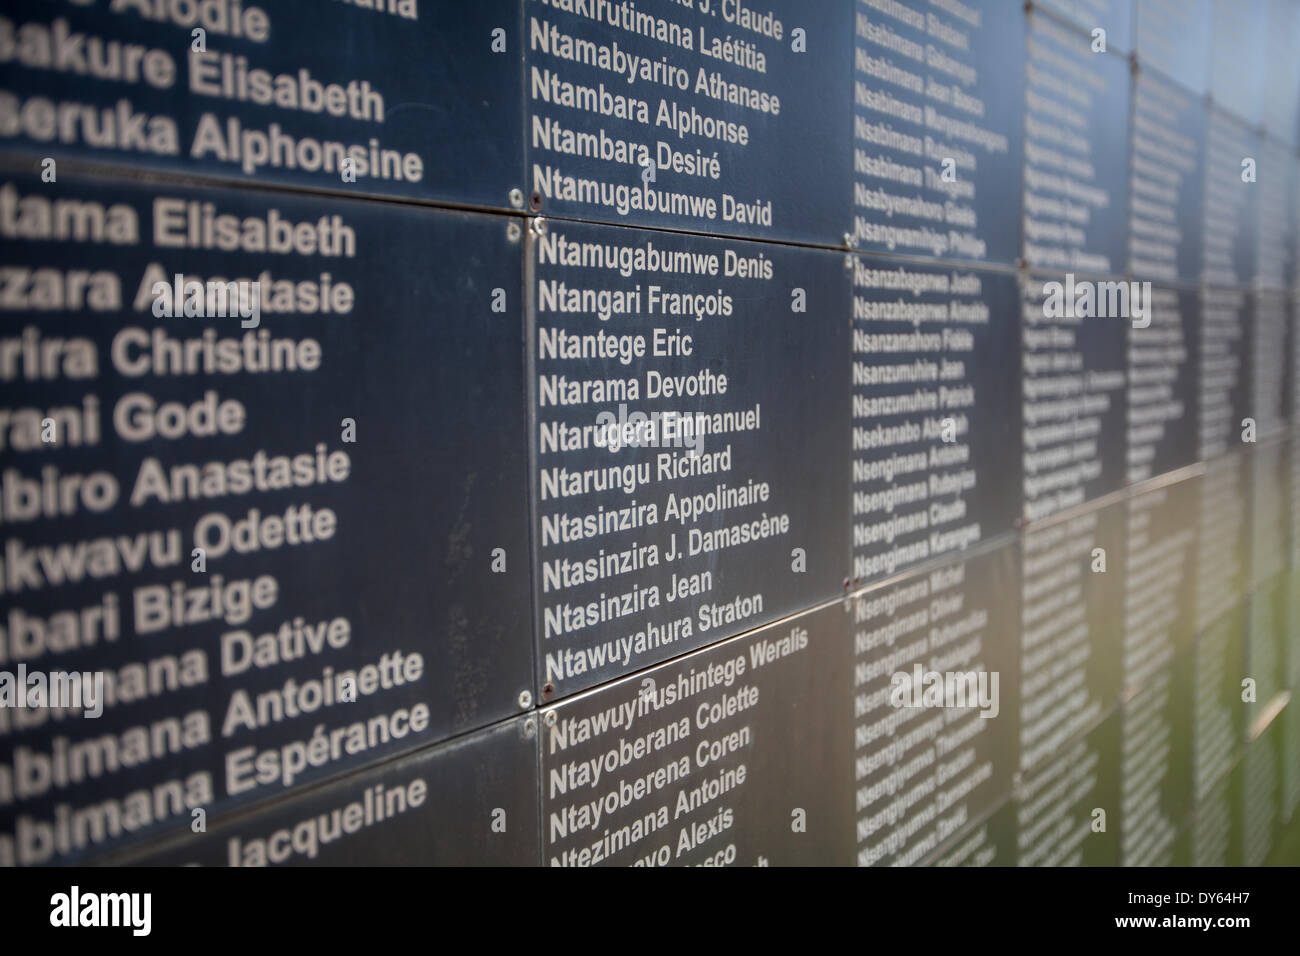 Kigali, Rwanda. 6th April 2014. A wall of remembrance outside The Kigali Genocide Memorial Centre with some of the names of people killed at the site during the genocide against the Tutsis. This week marks the 20th anniversary of the genocide. During the approximate 100-day period from April 7th 1994 to mid-July, an estimated 500,000–1,000,000 Rwandans were killed, constituting as much as 20% of the country's total population and 70% of the Tutsi then living in Rwanda. Stock Photo